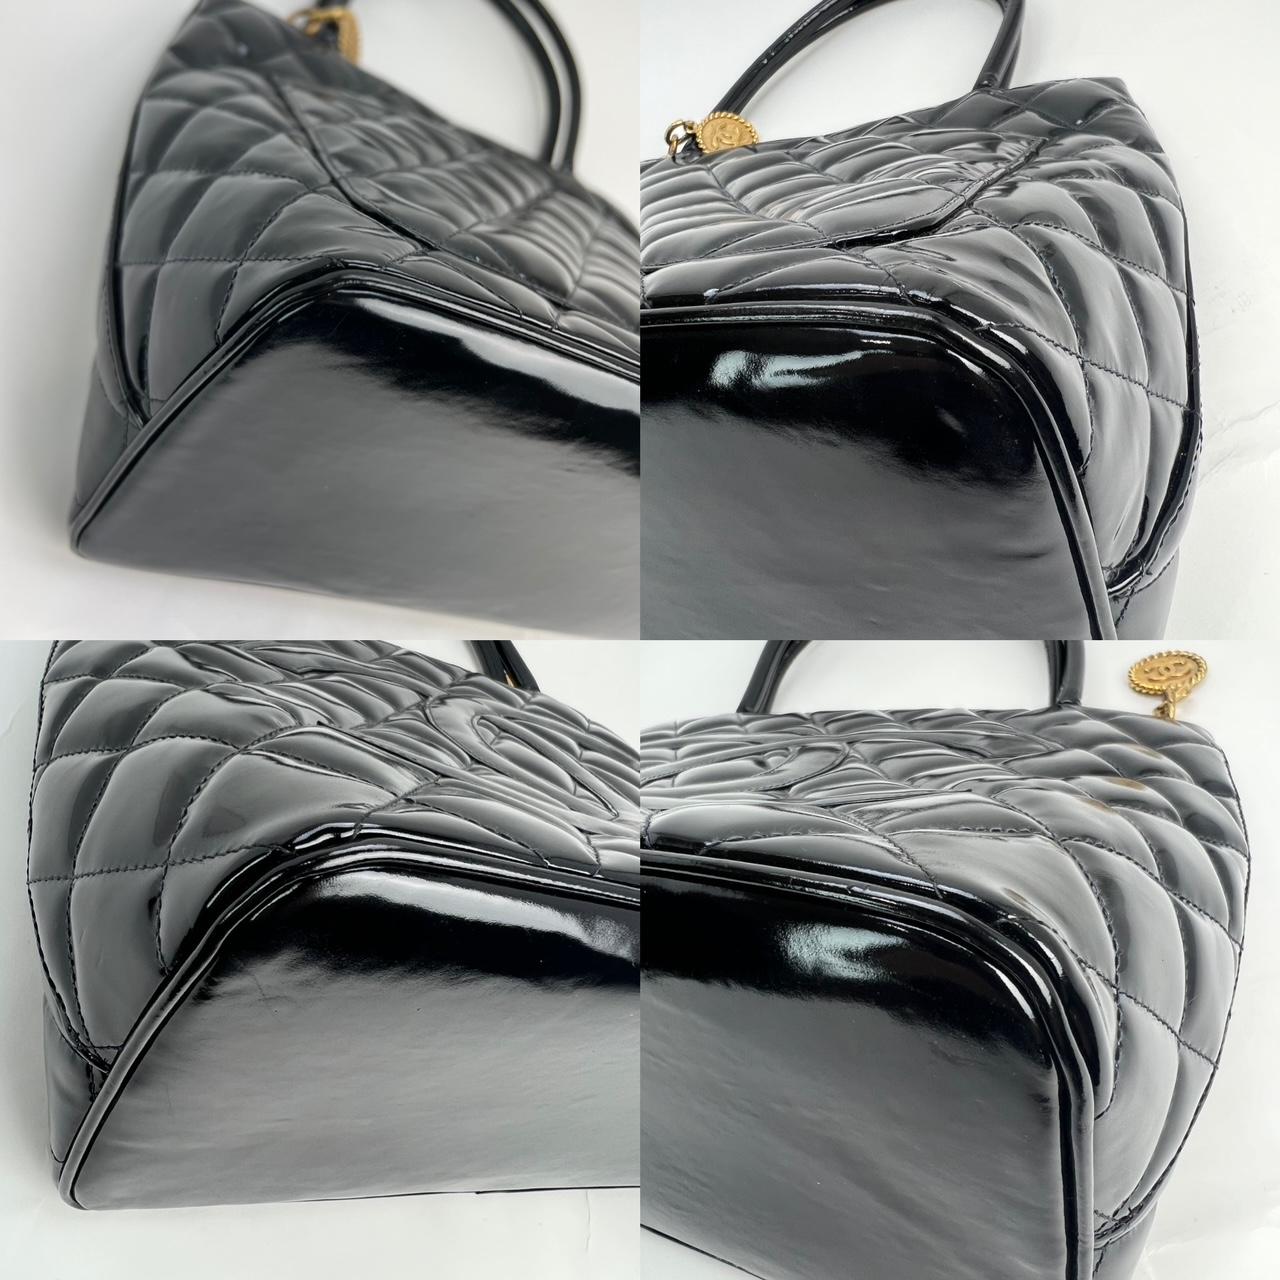 Pre-Owned  100% Authentic
CHANEL Vintage Patent Medallion Black Tote
RATING: A/B...Very Good, well maintained, 
shows minor signs of wear
MATERIAL: patent leather, leather
HANDLE: double patent